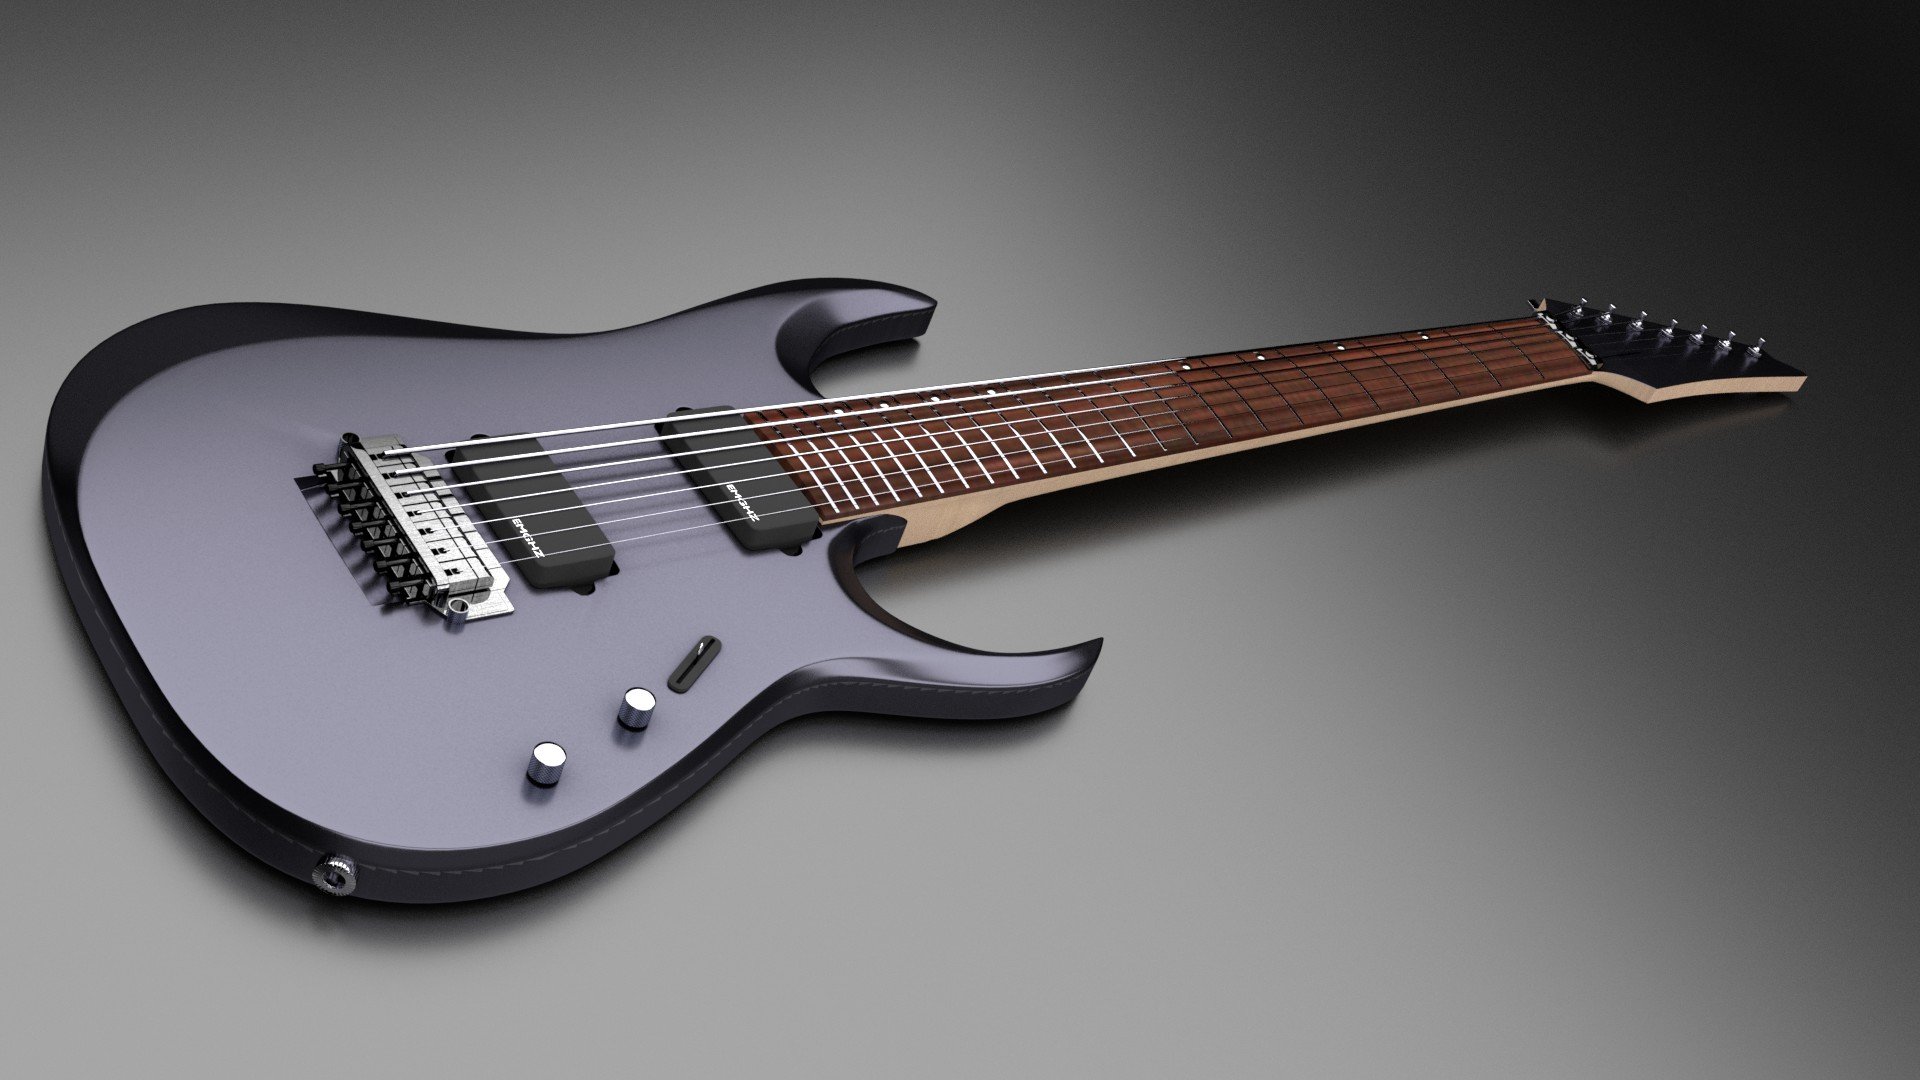 Ibanez 7 String Electric Guitar   3D Model by Agungkuncoro 1920x1080